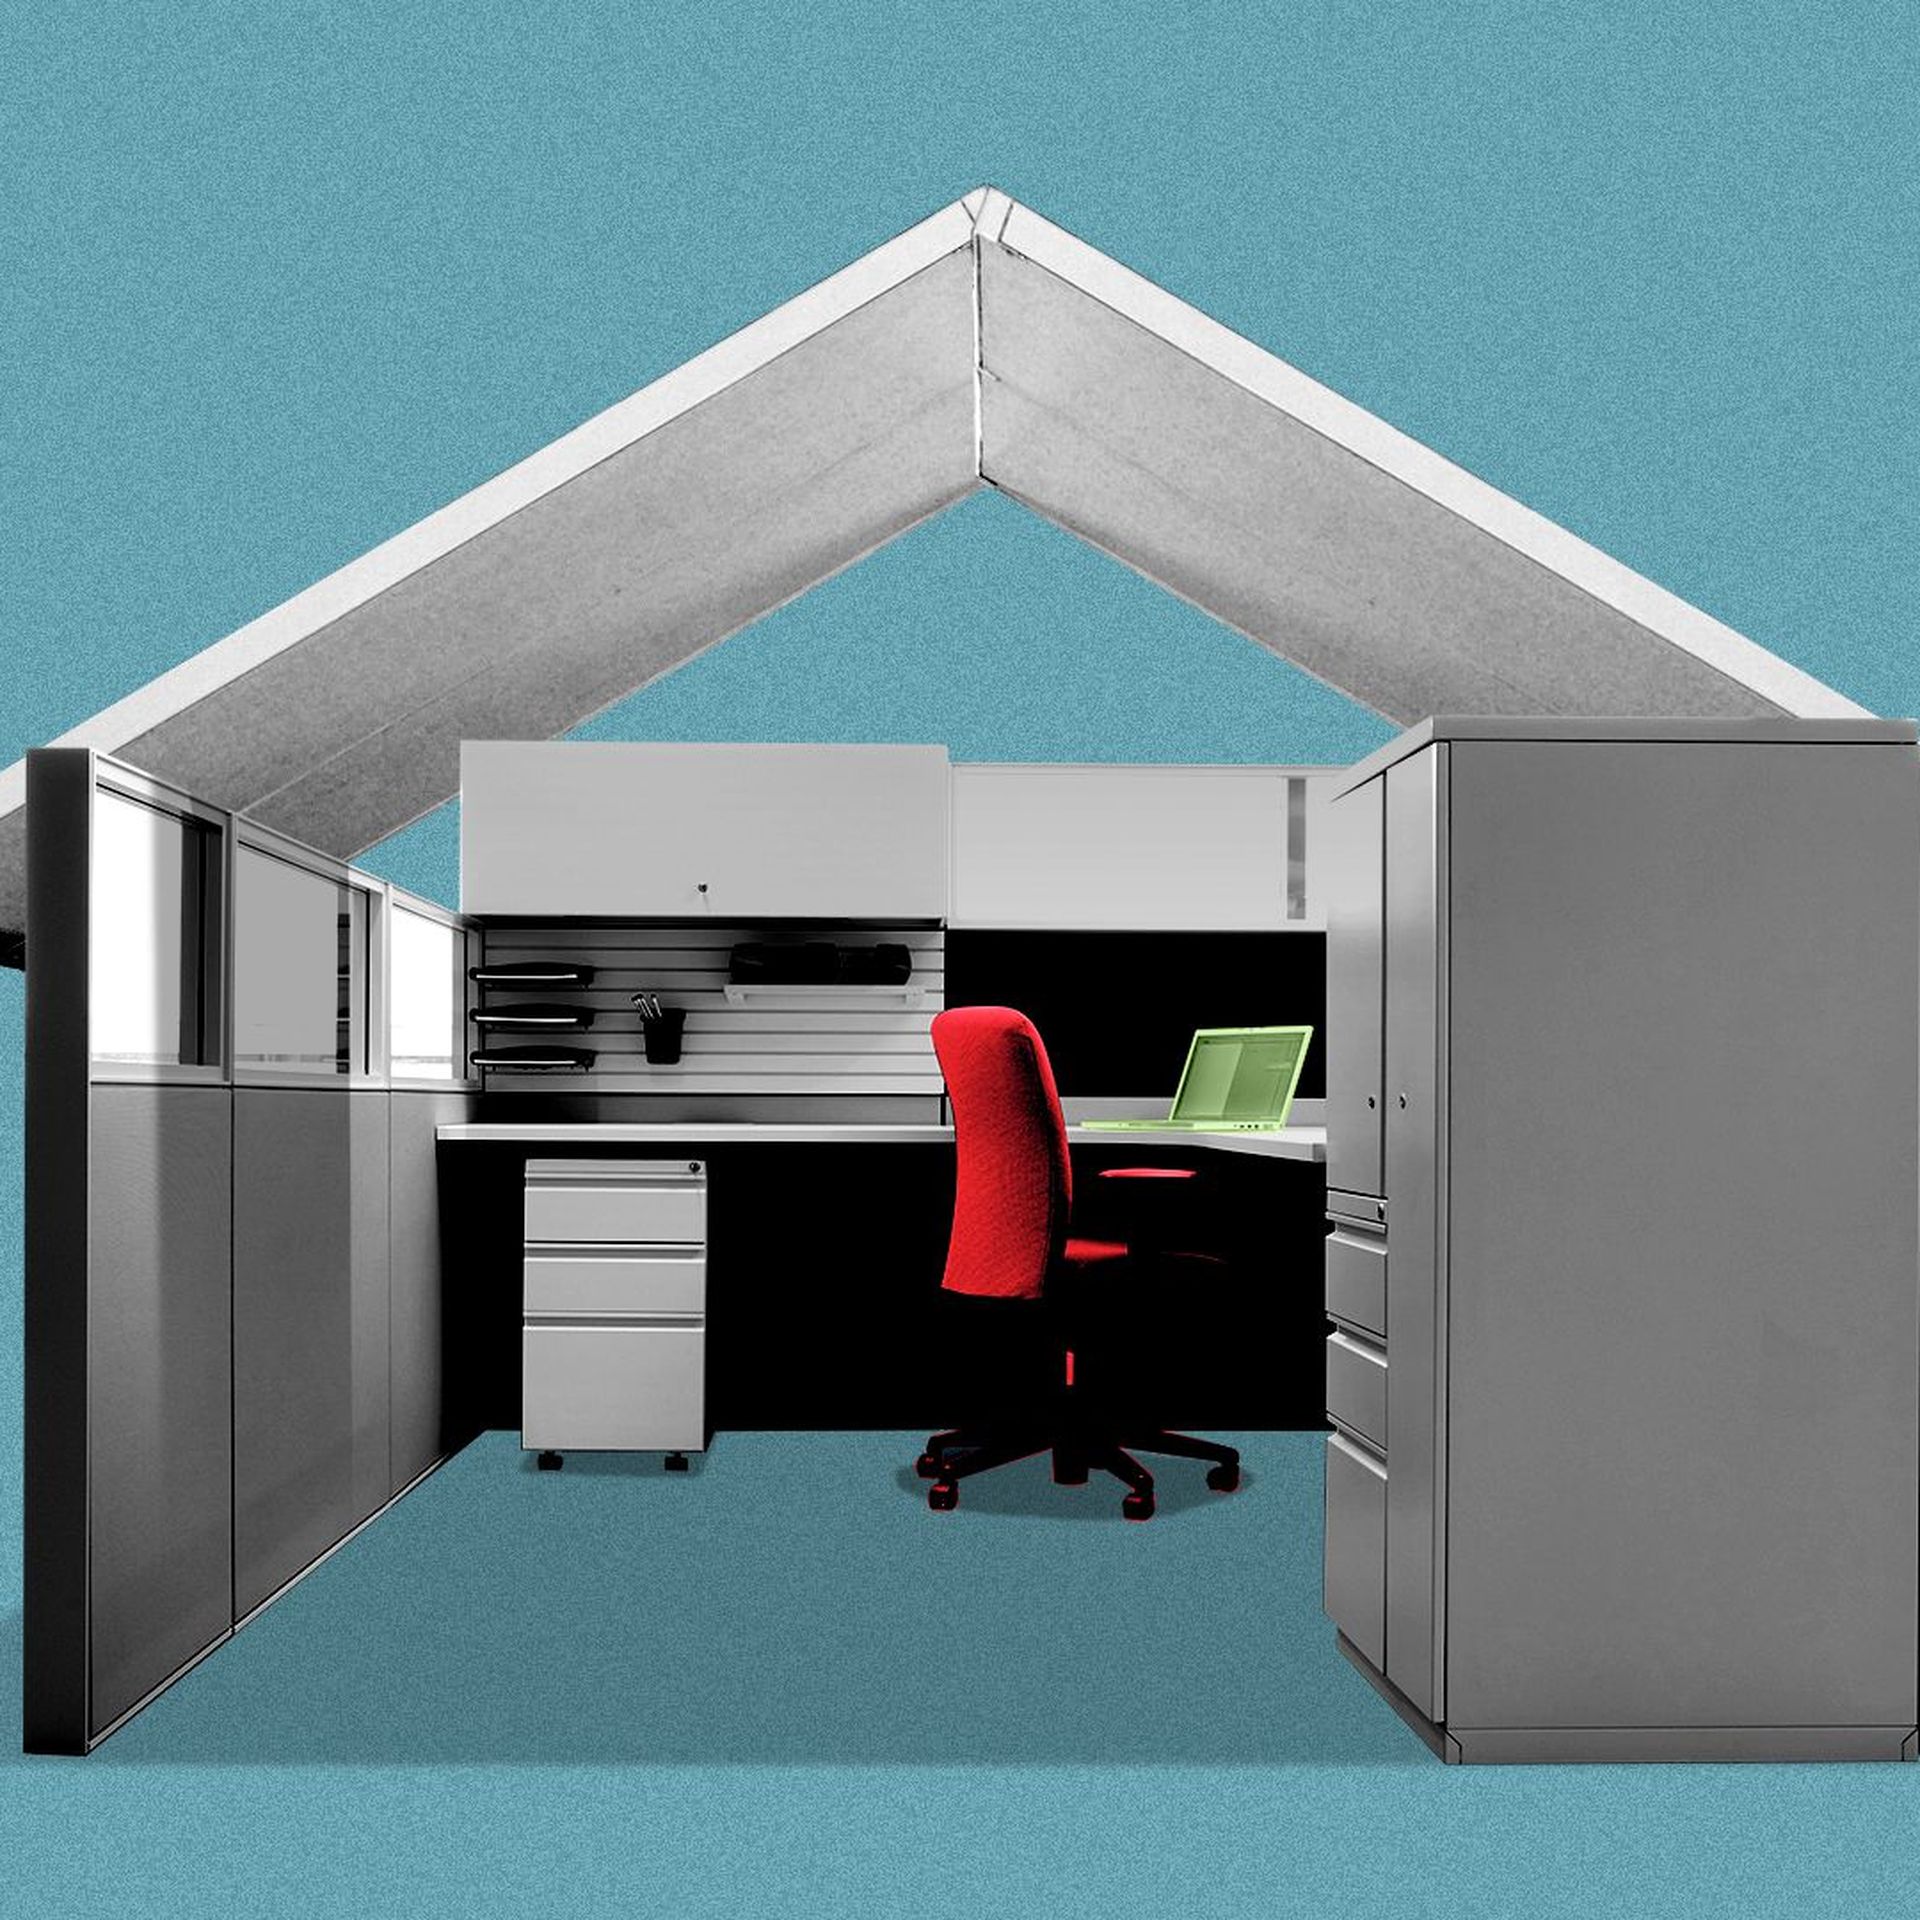 Illustration of an office cubicle with a roof like a house.